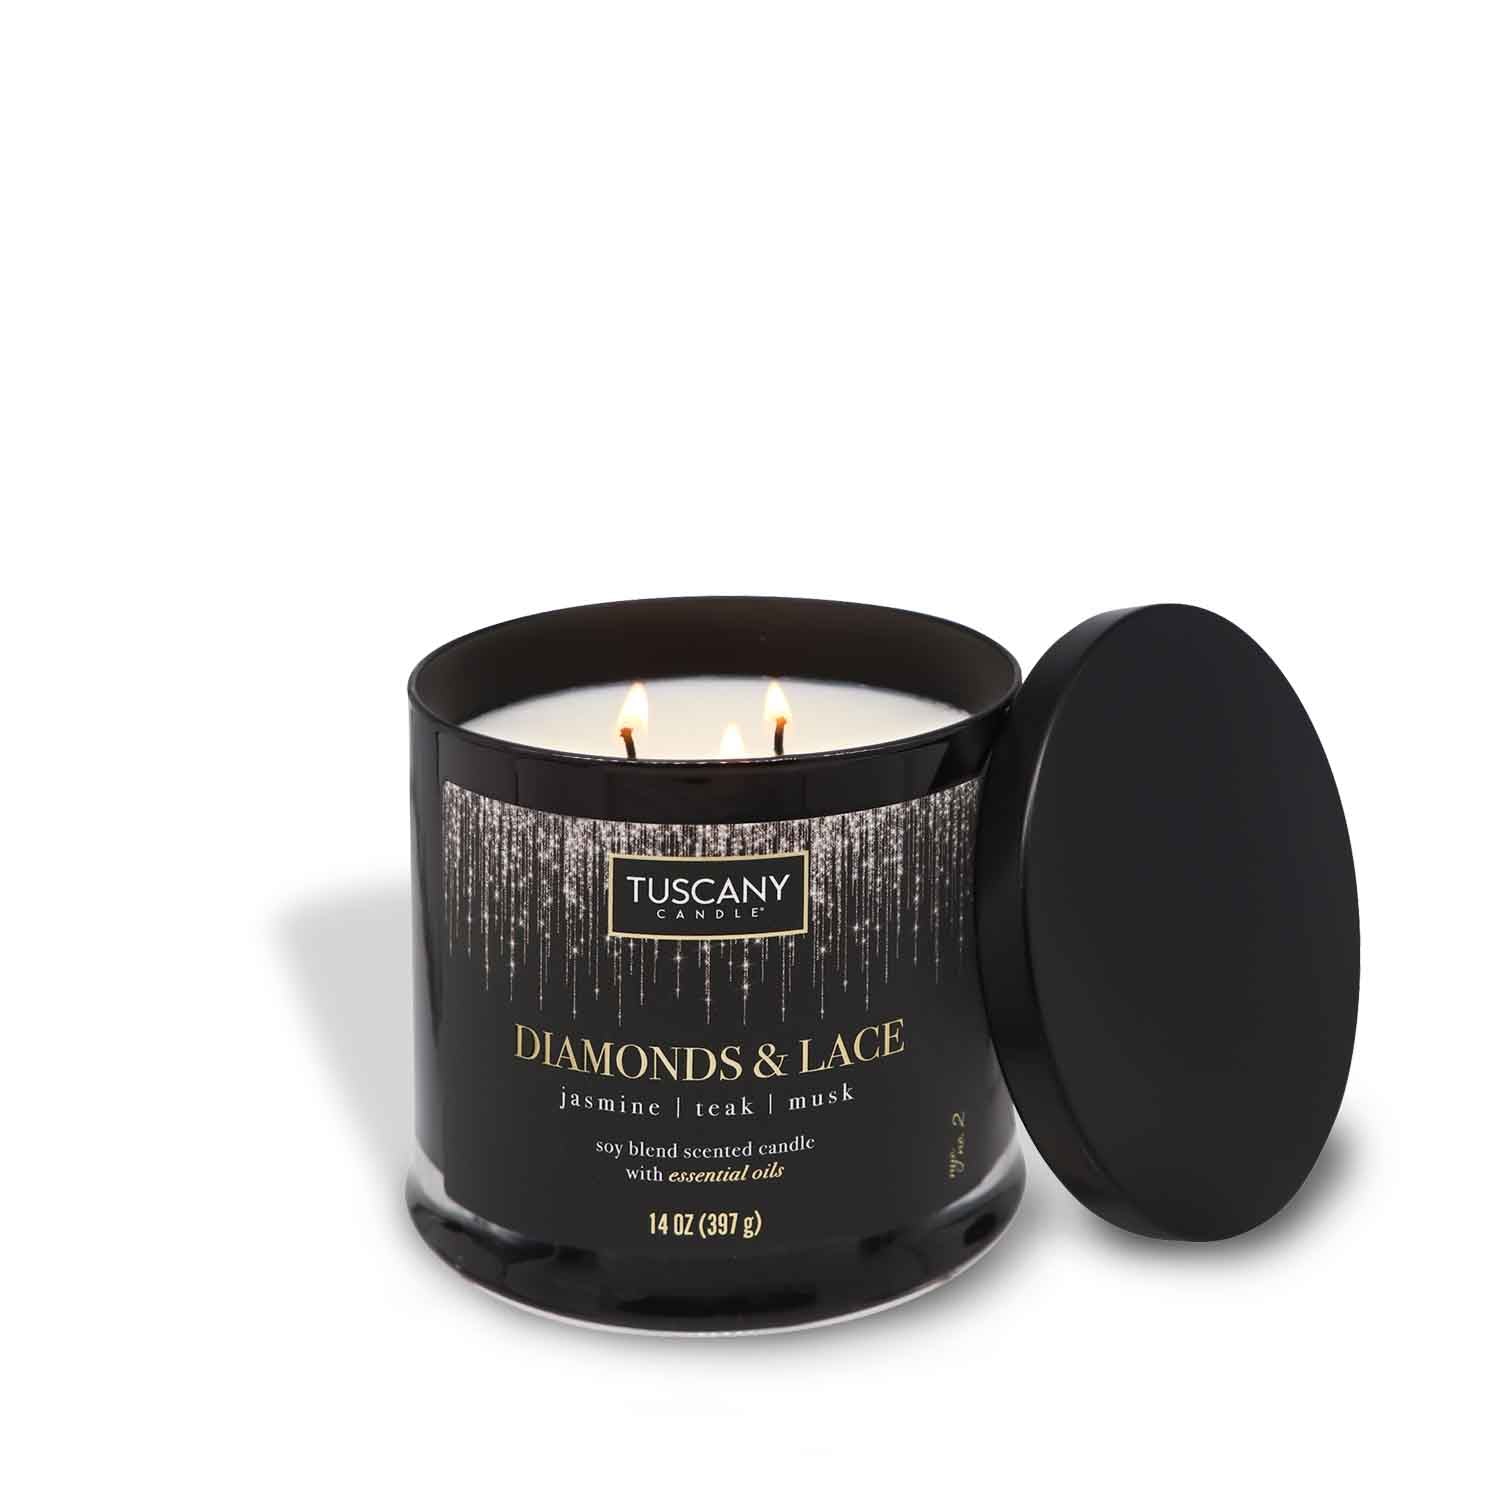 A Tuscany Candle Diamonds & Lace Scented Jar Candle (14 oz) – Celebrations Collection, with a black lid, on a winter nights background.